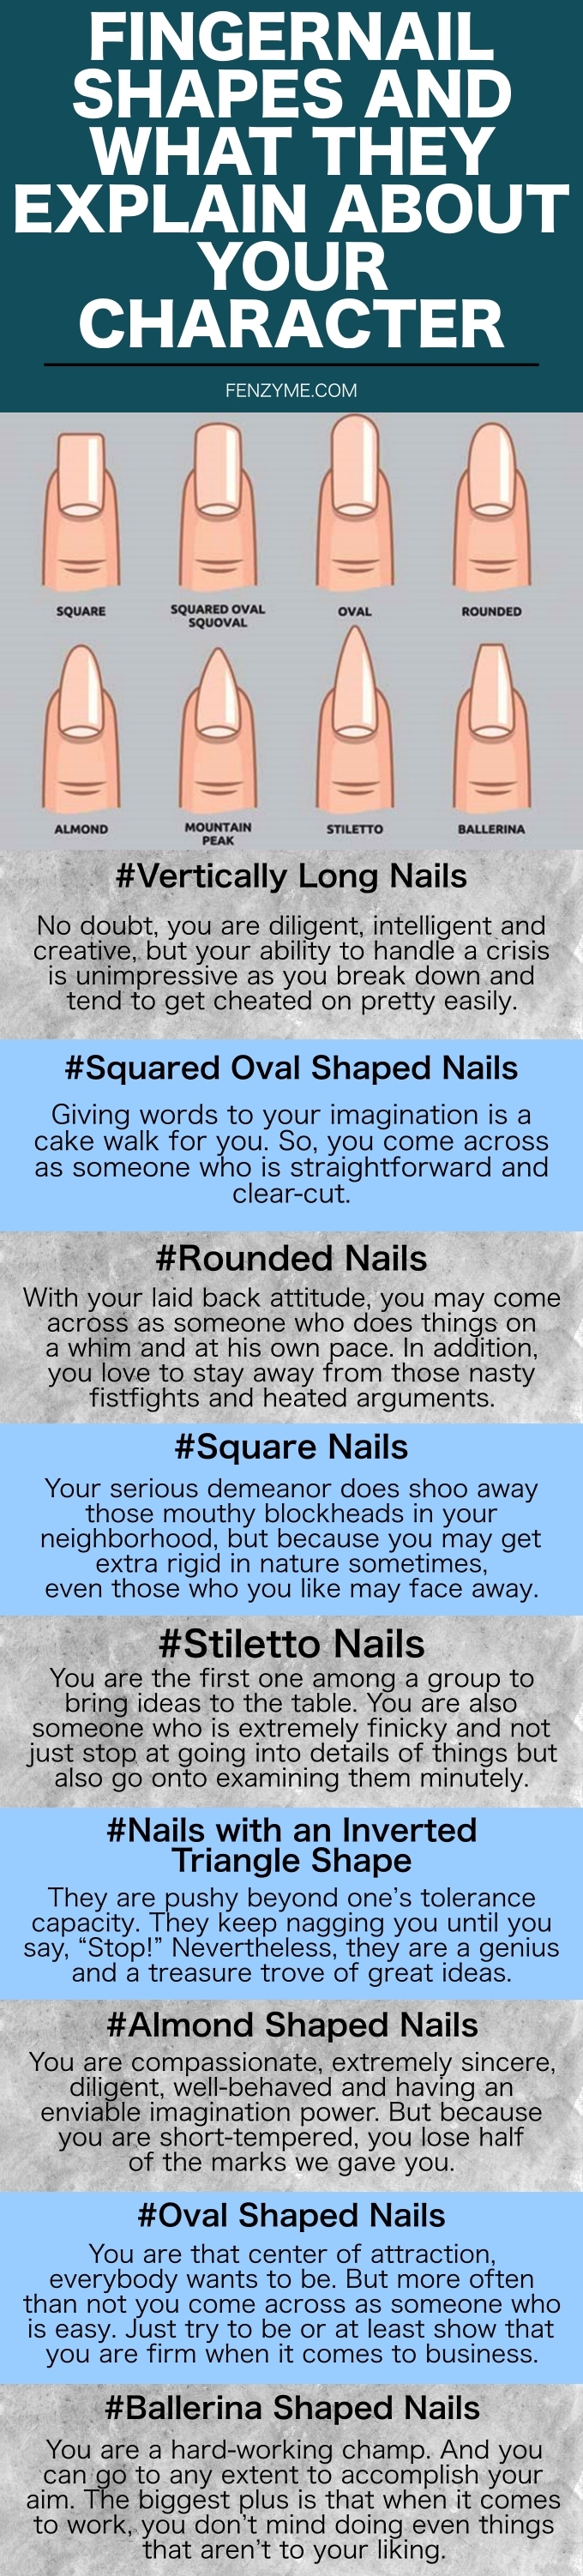 Fingernail shapes and what they explain about your character